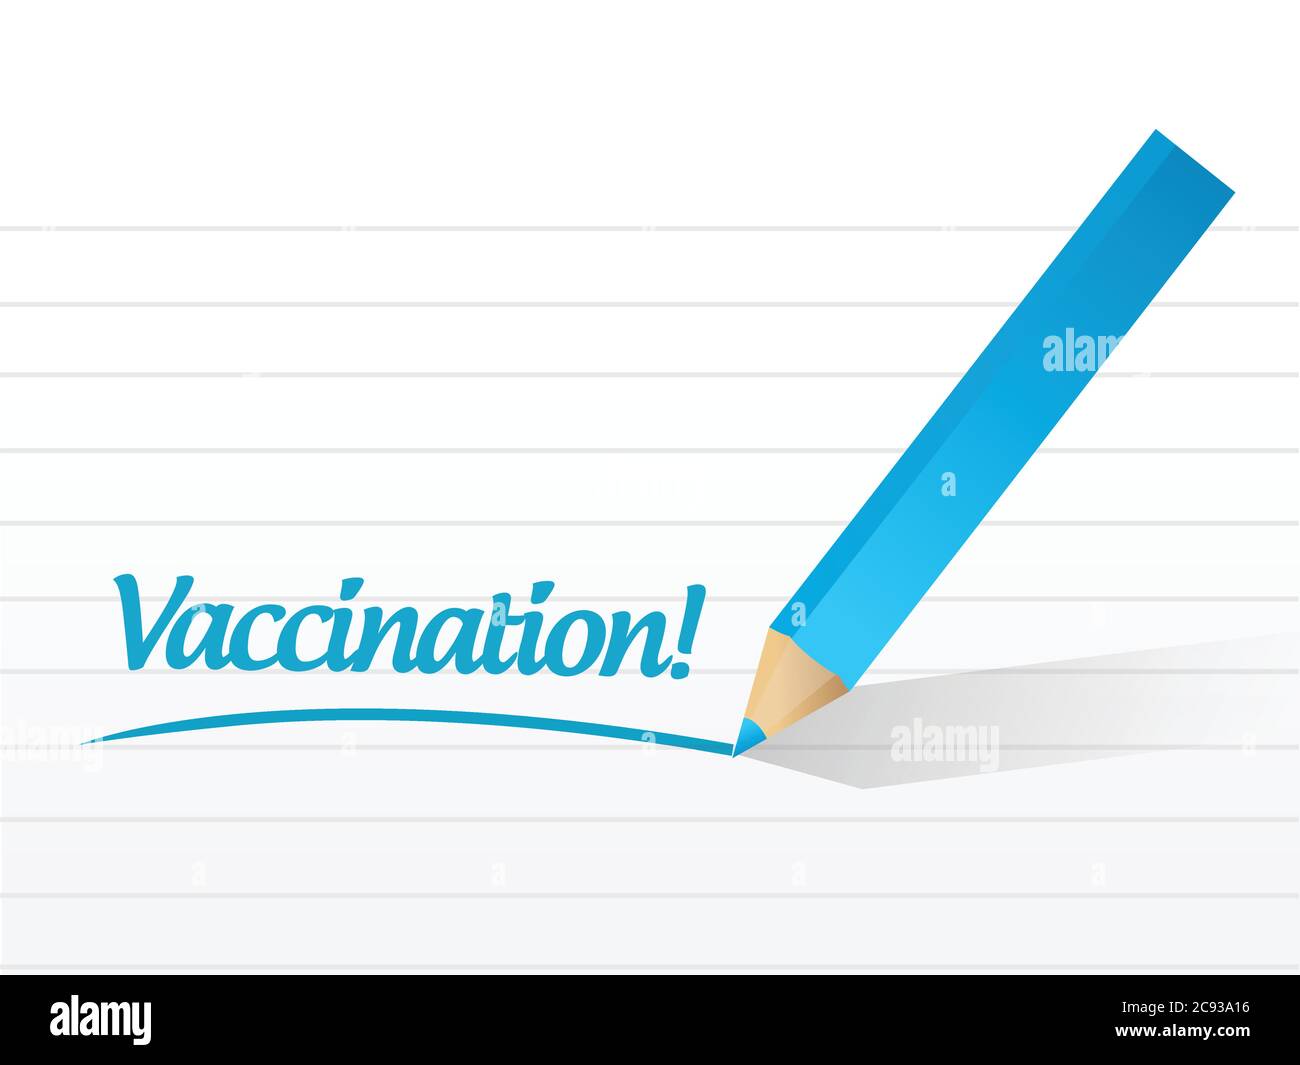 Vaccination message sign illustration design over a white background Stock Vector